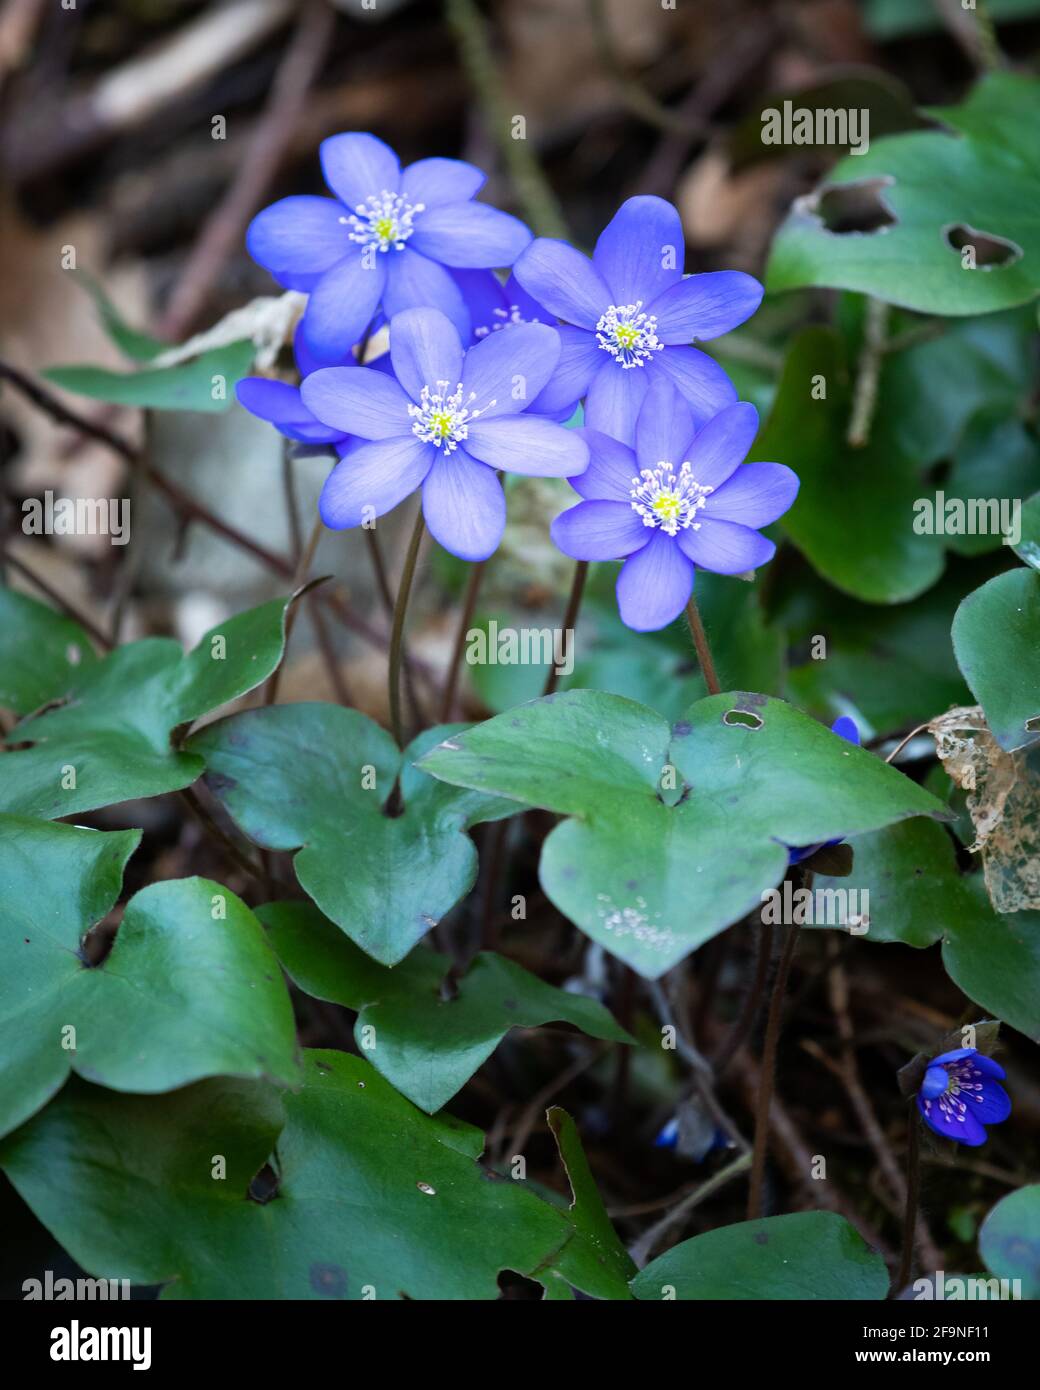 A group of kidneyworts (Hepatica nobilis) in a deciduous forest in springtime Stock Photo